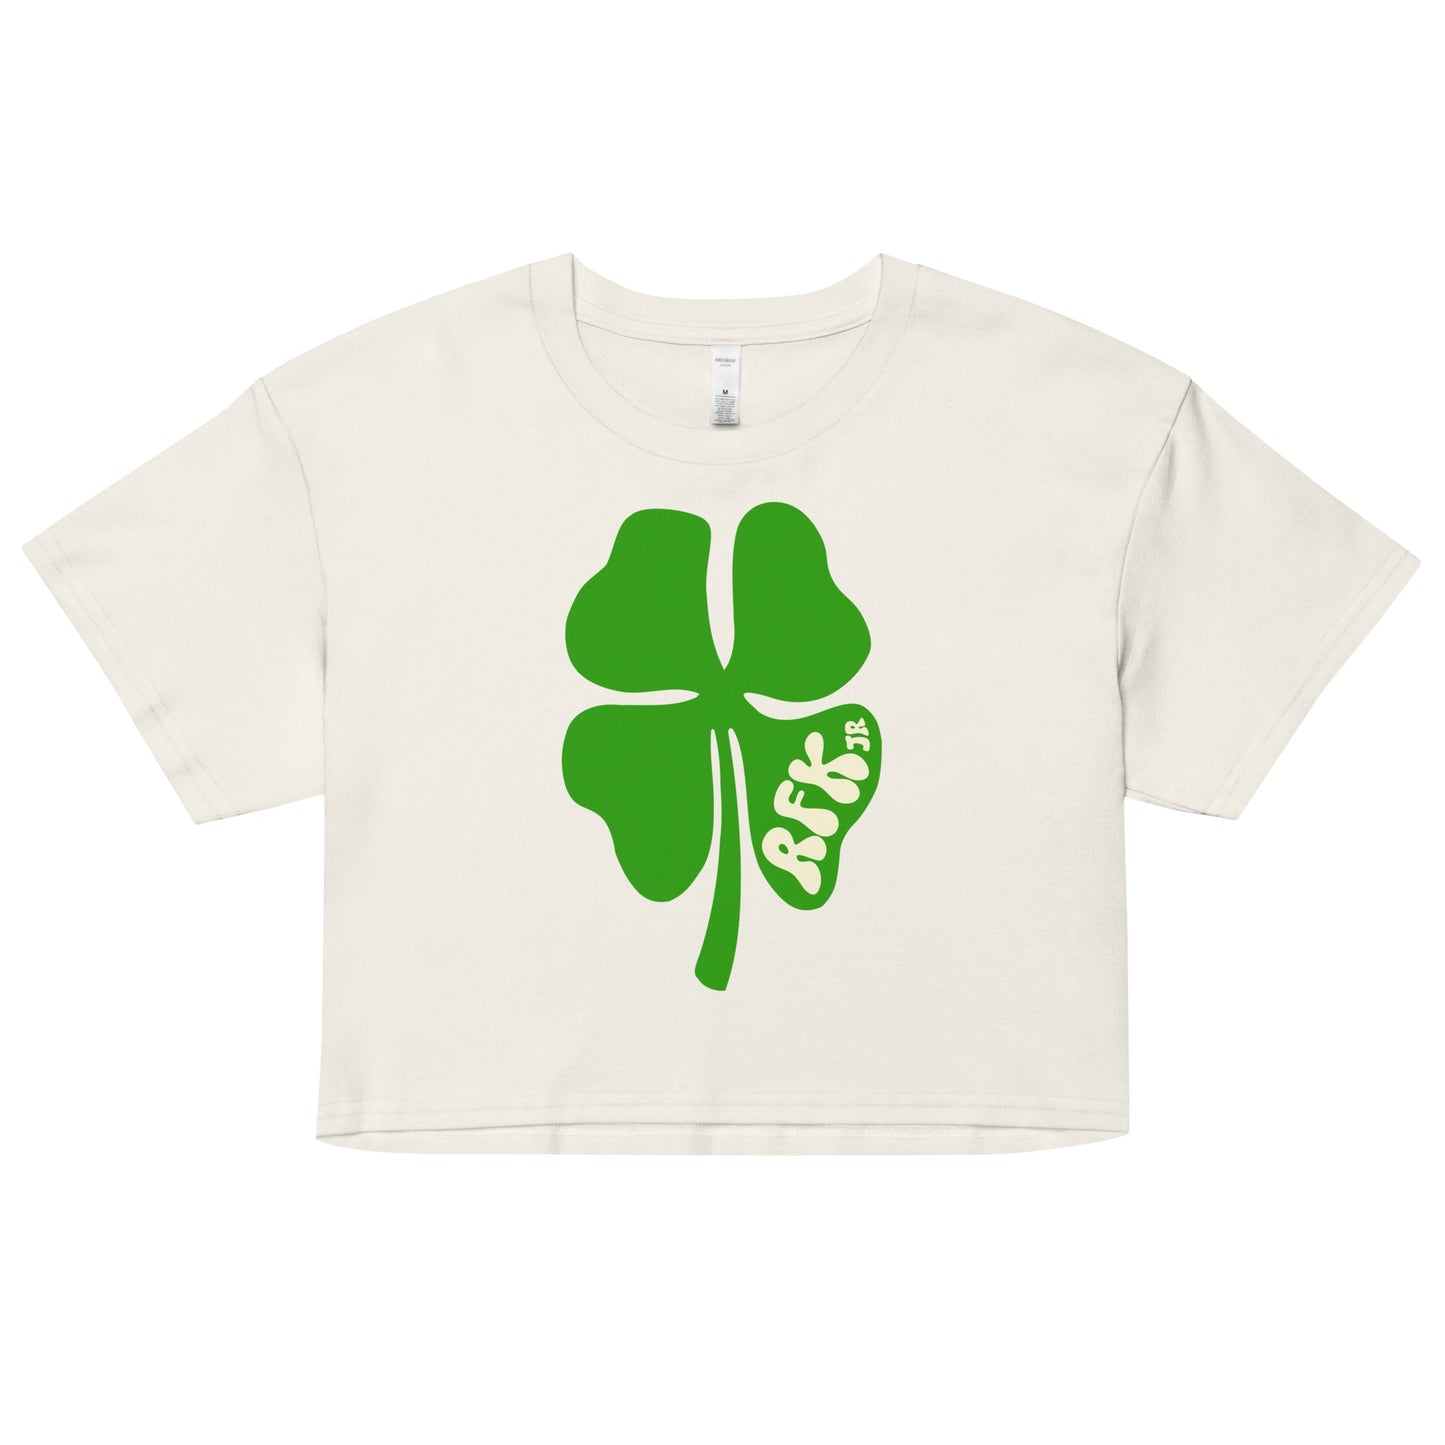 RFK Jr. Clover Women’s Crop Top - TEAM KENNEDY. All rights reserved